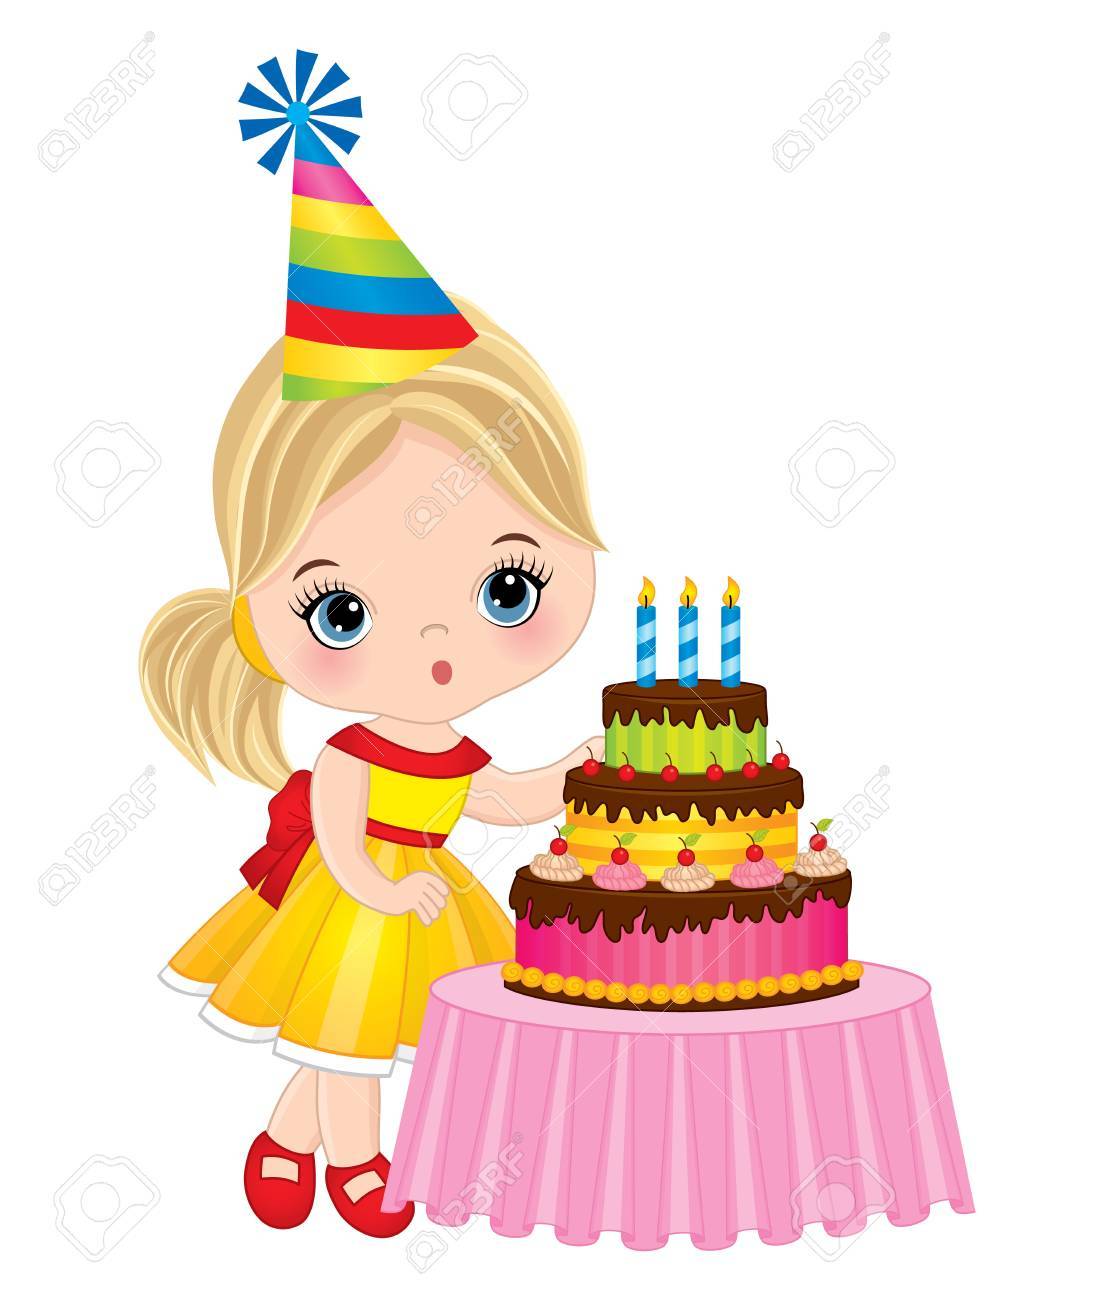 Girl with birthday cake clipart